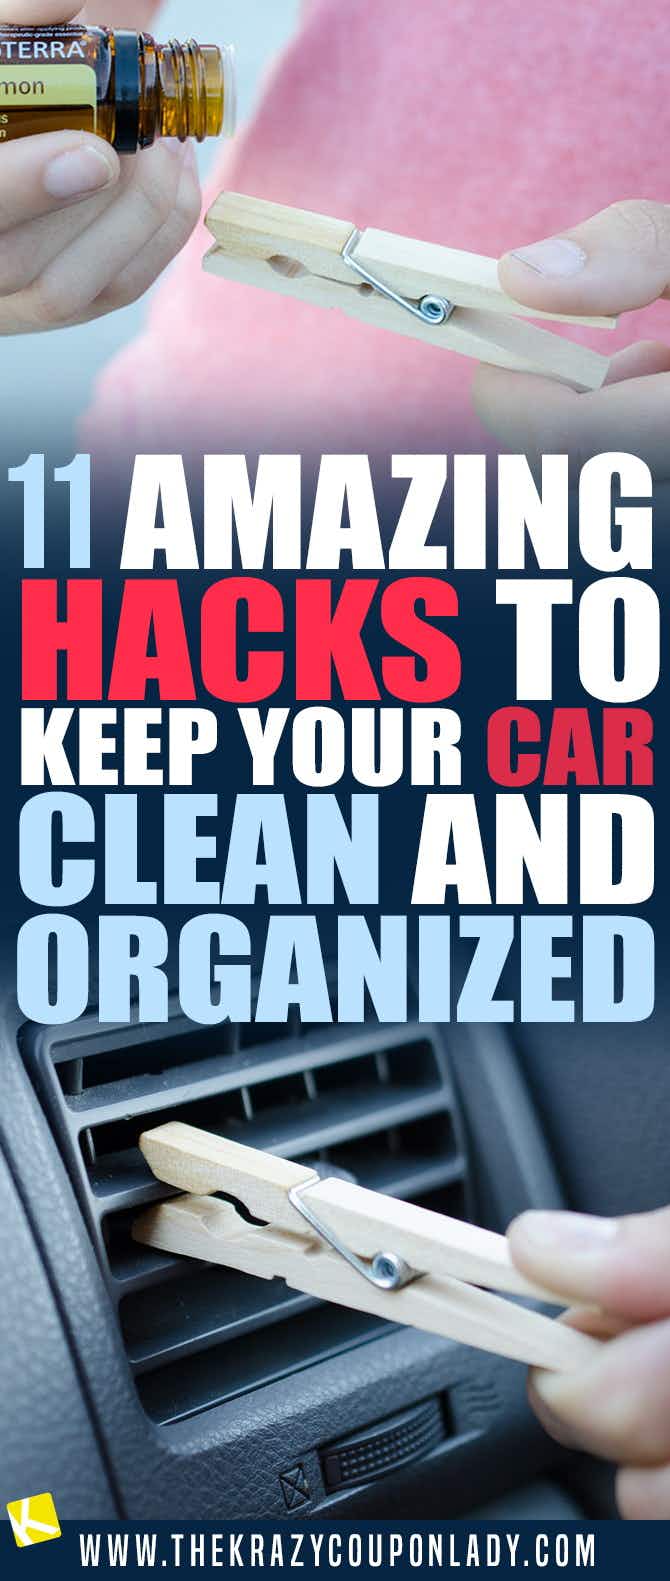 11 Amazing Hacks to Keep Your Car Clean and Organized